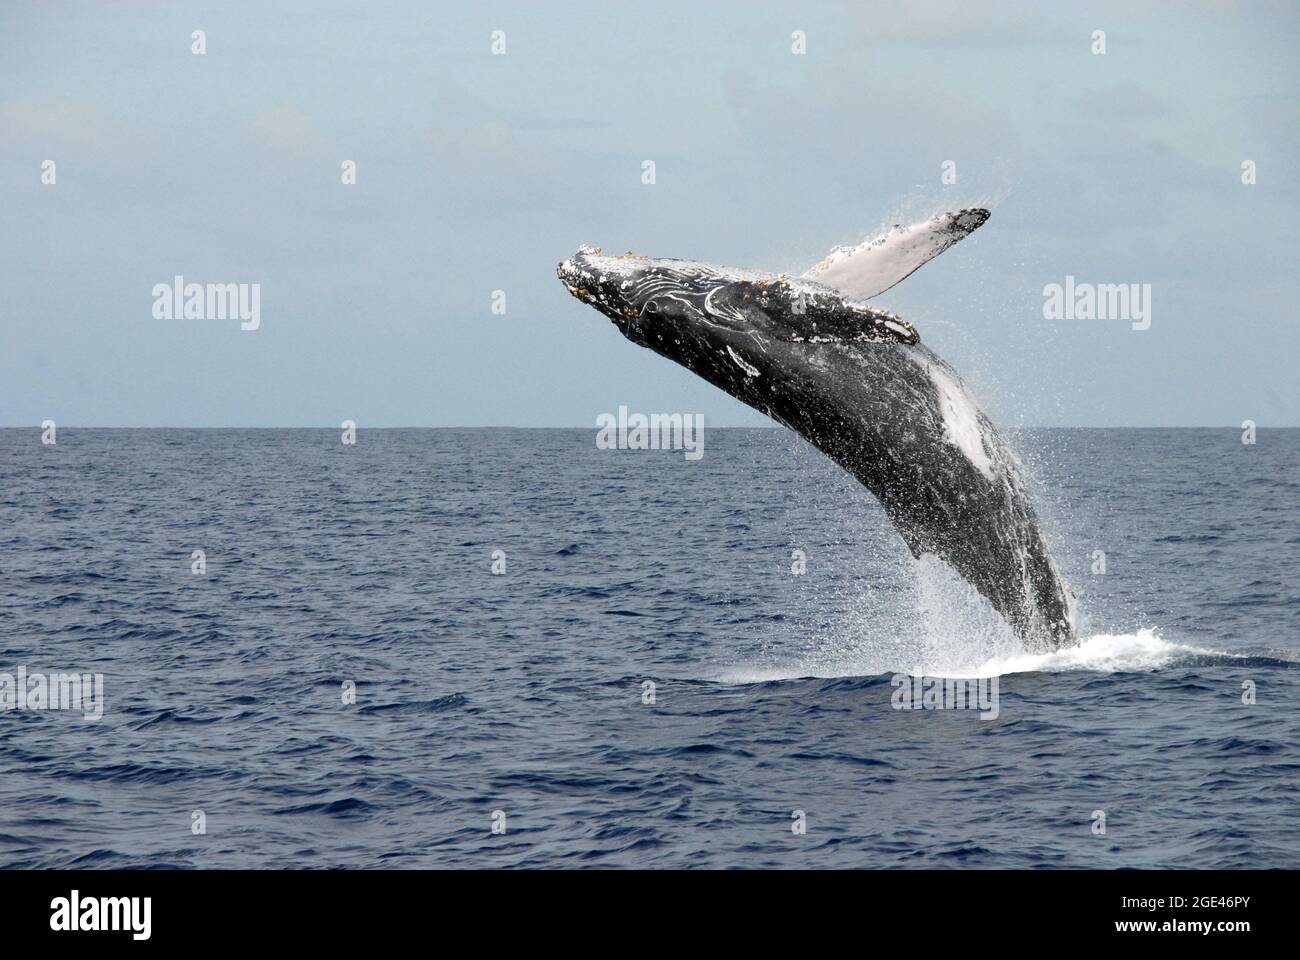 Whale breaching the water Stock Photo